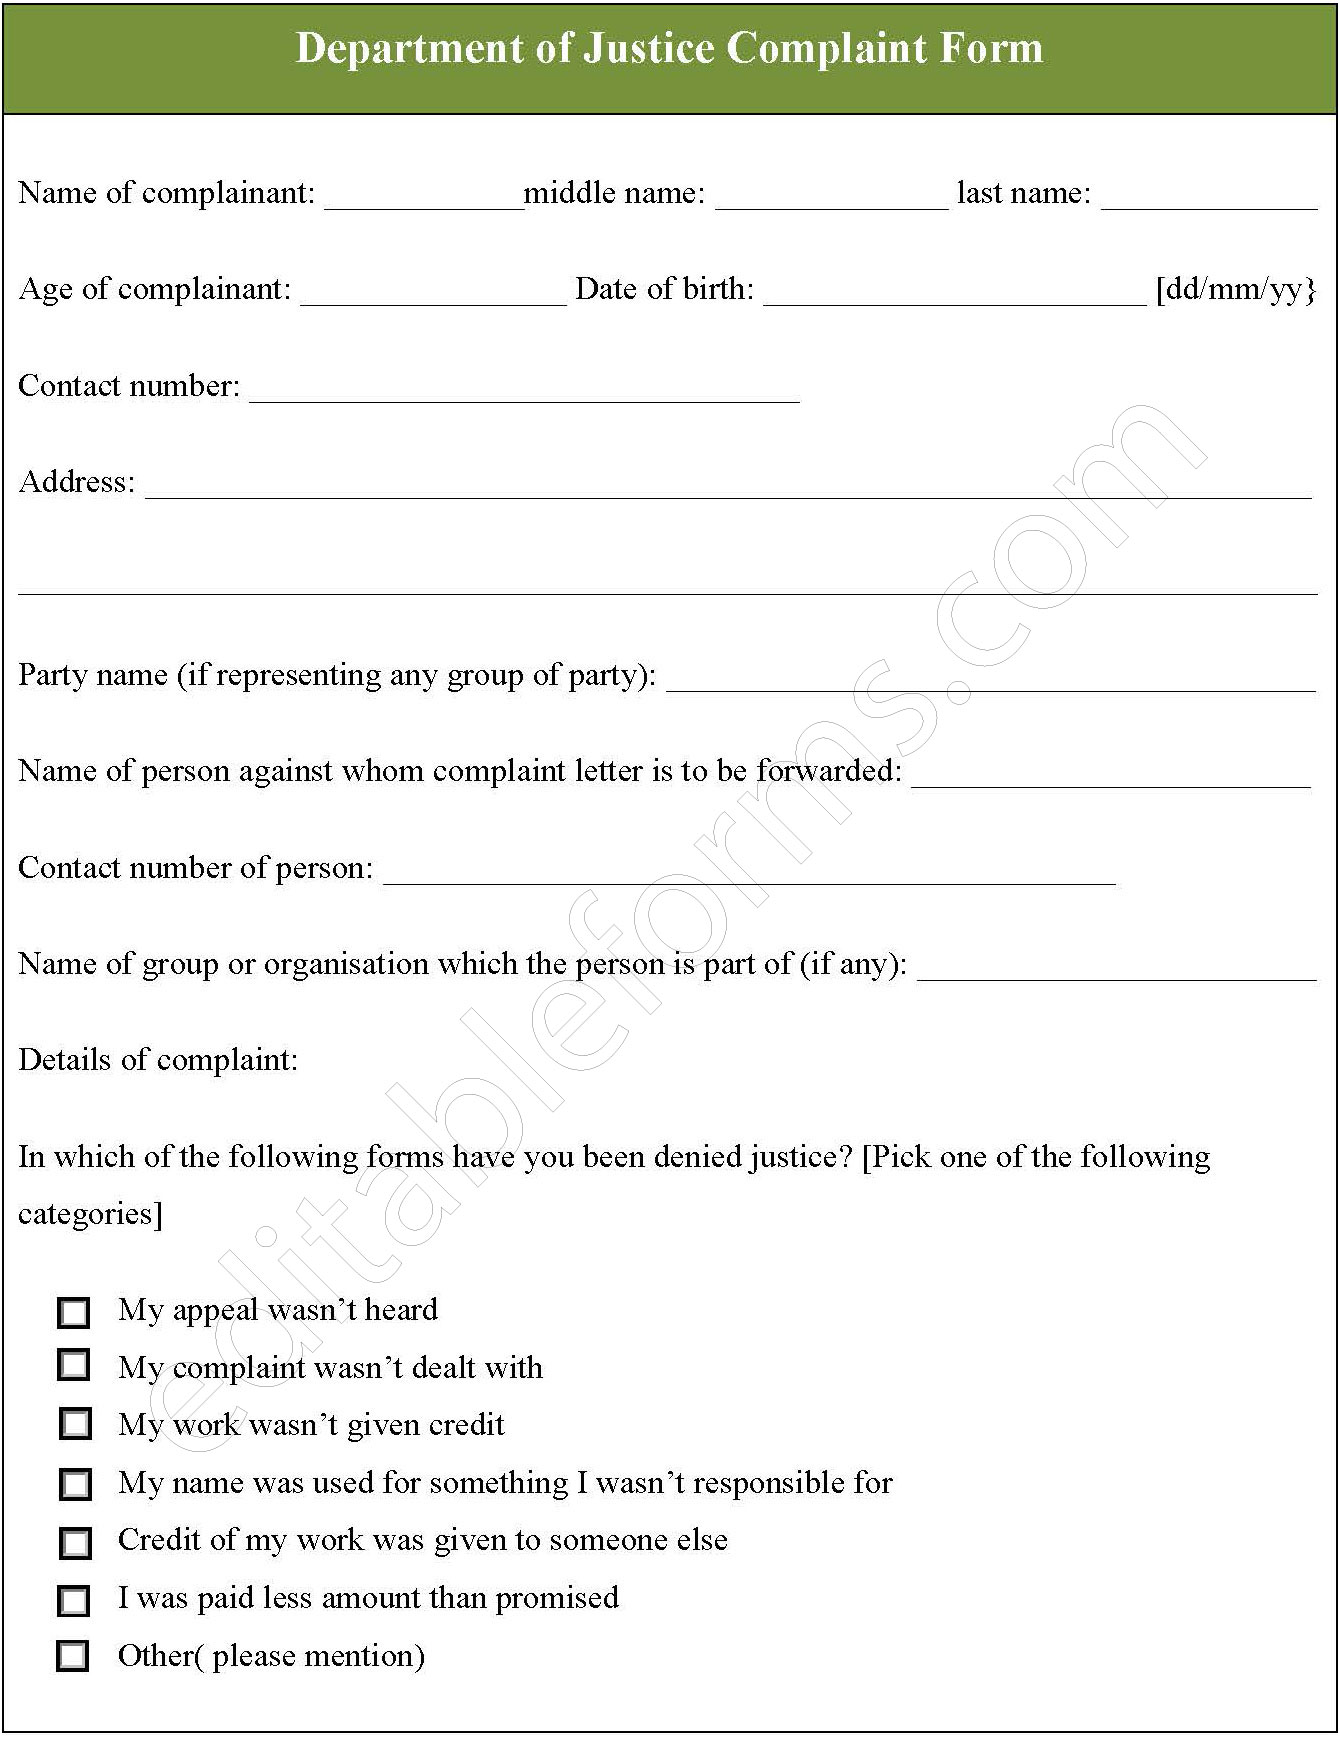 Department of Justice Complaint Form